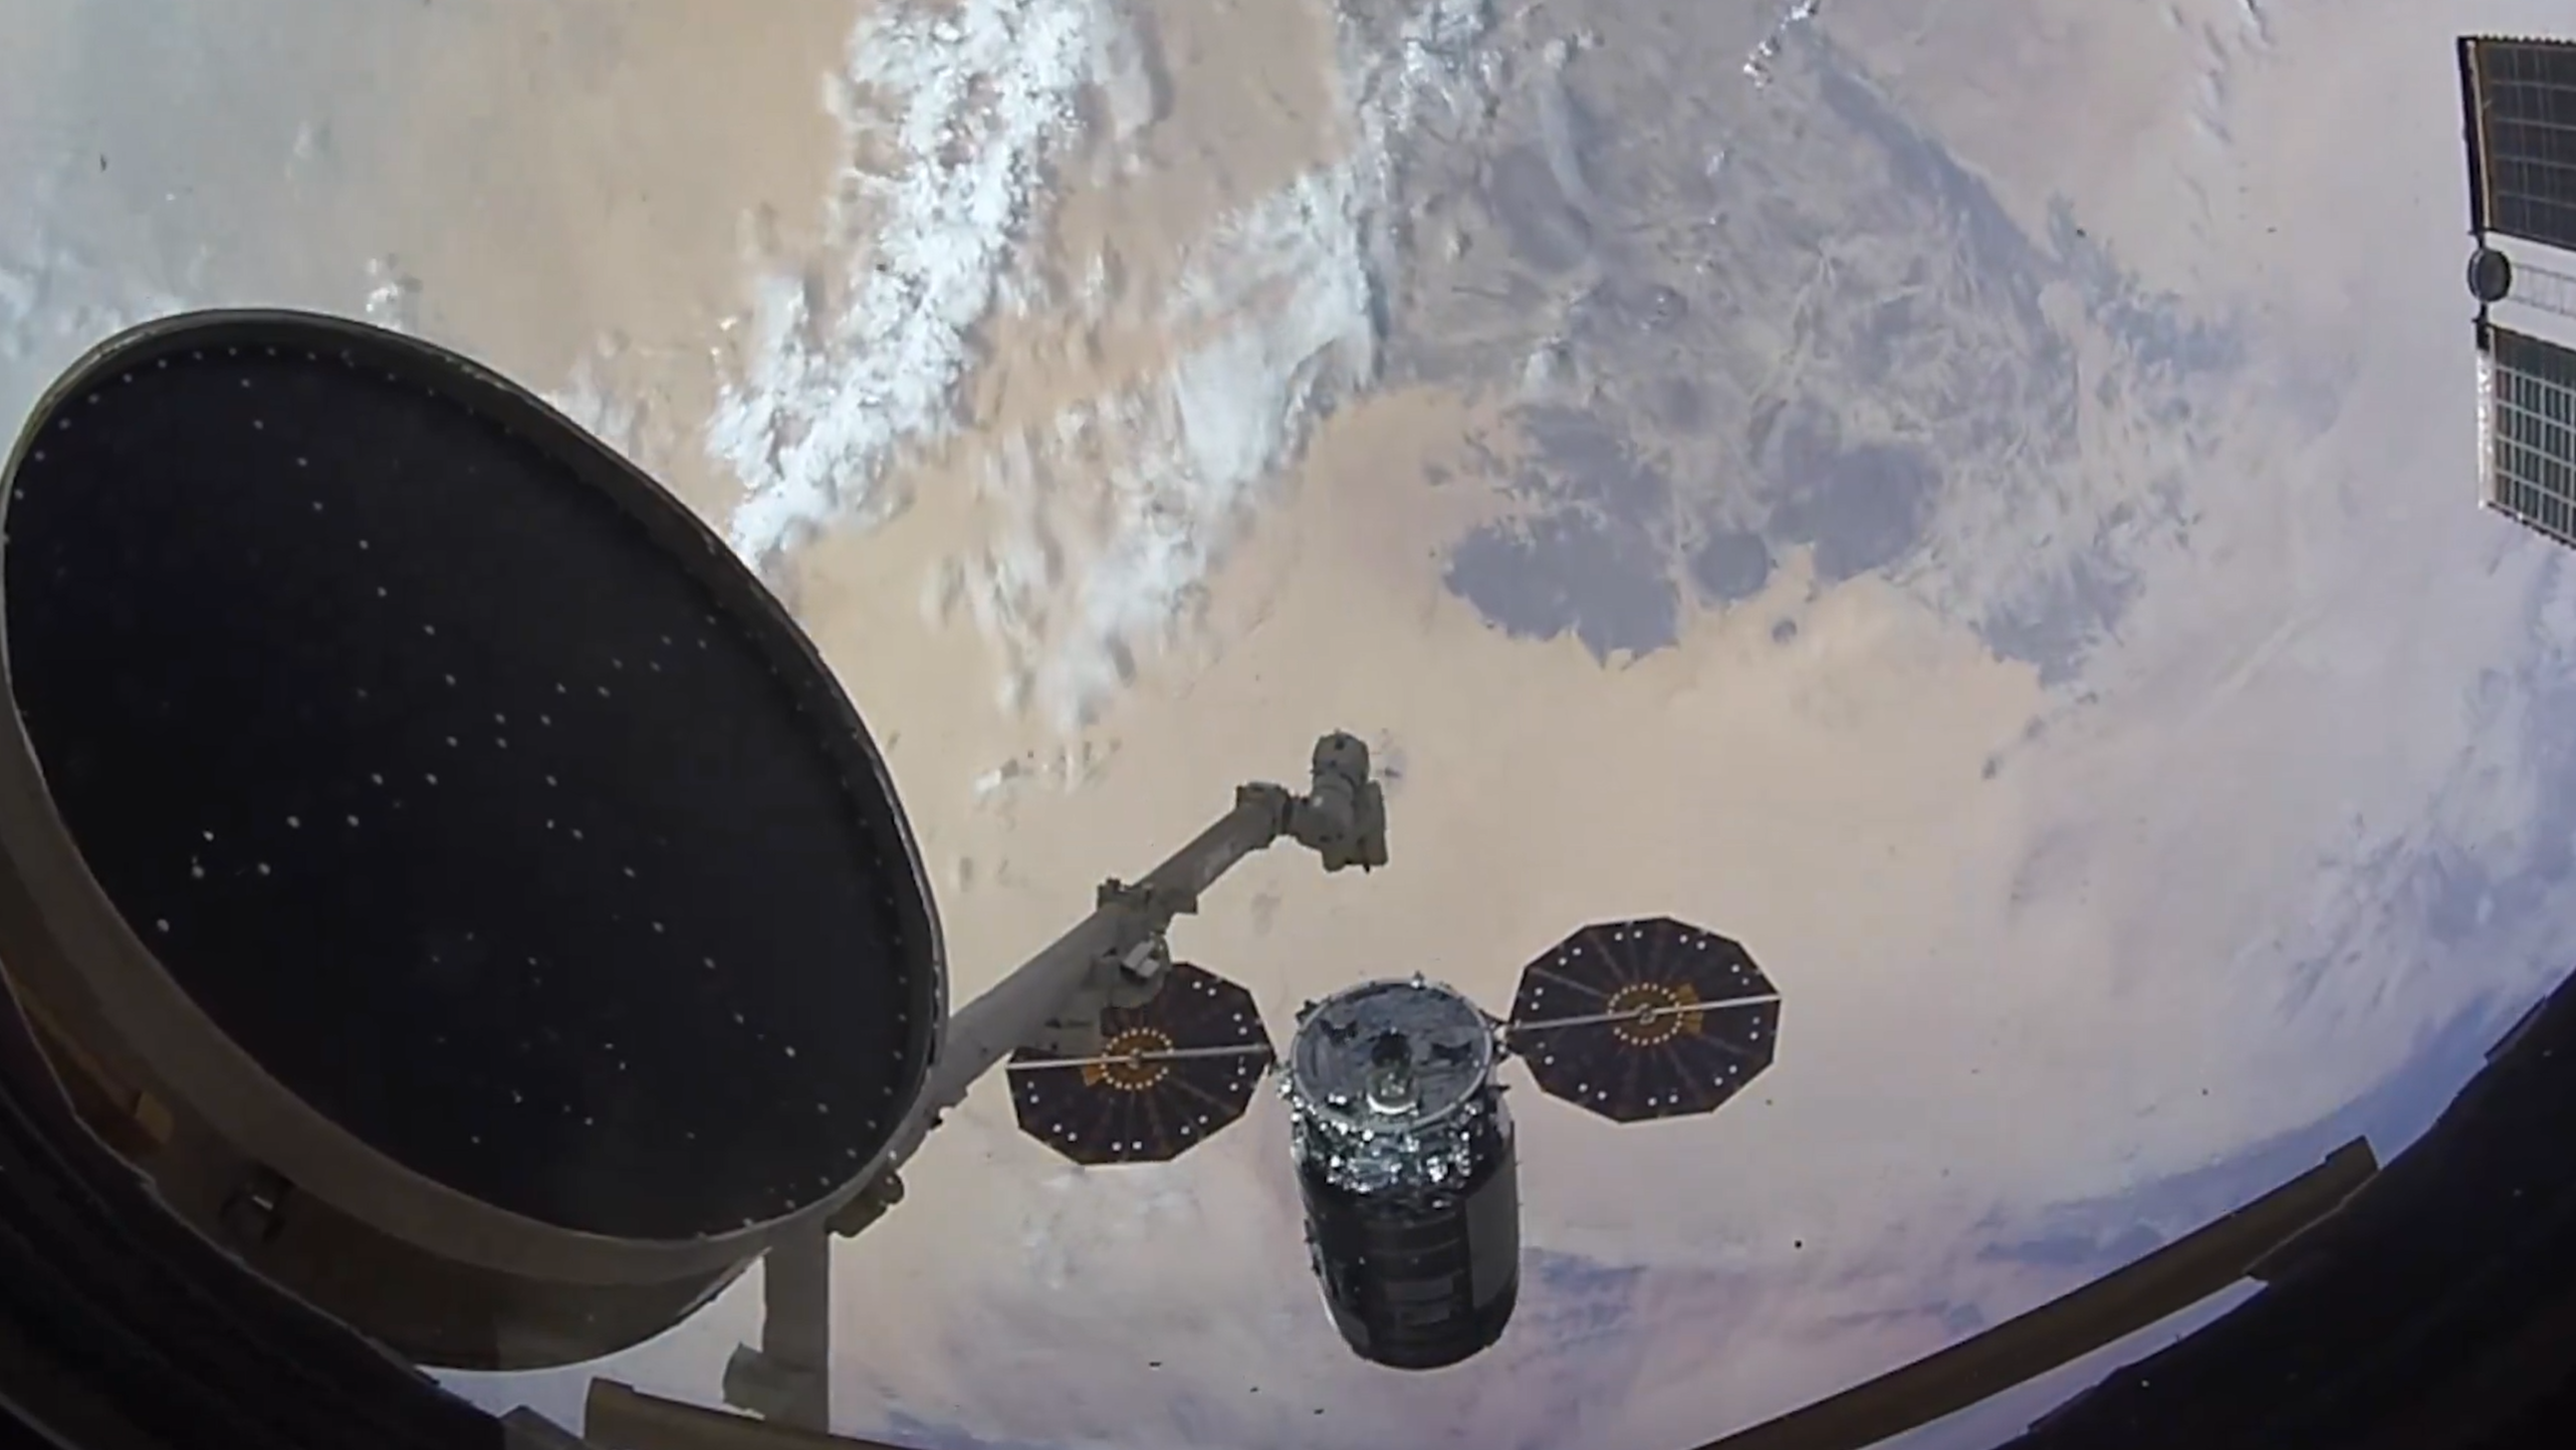 ISS astronauts show what it's like to capture a spacecraft with a robotic arm (video)